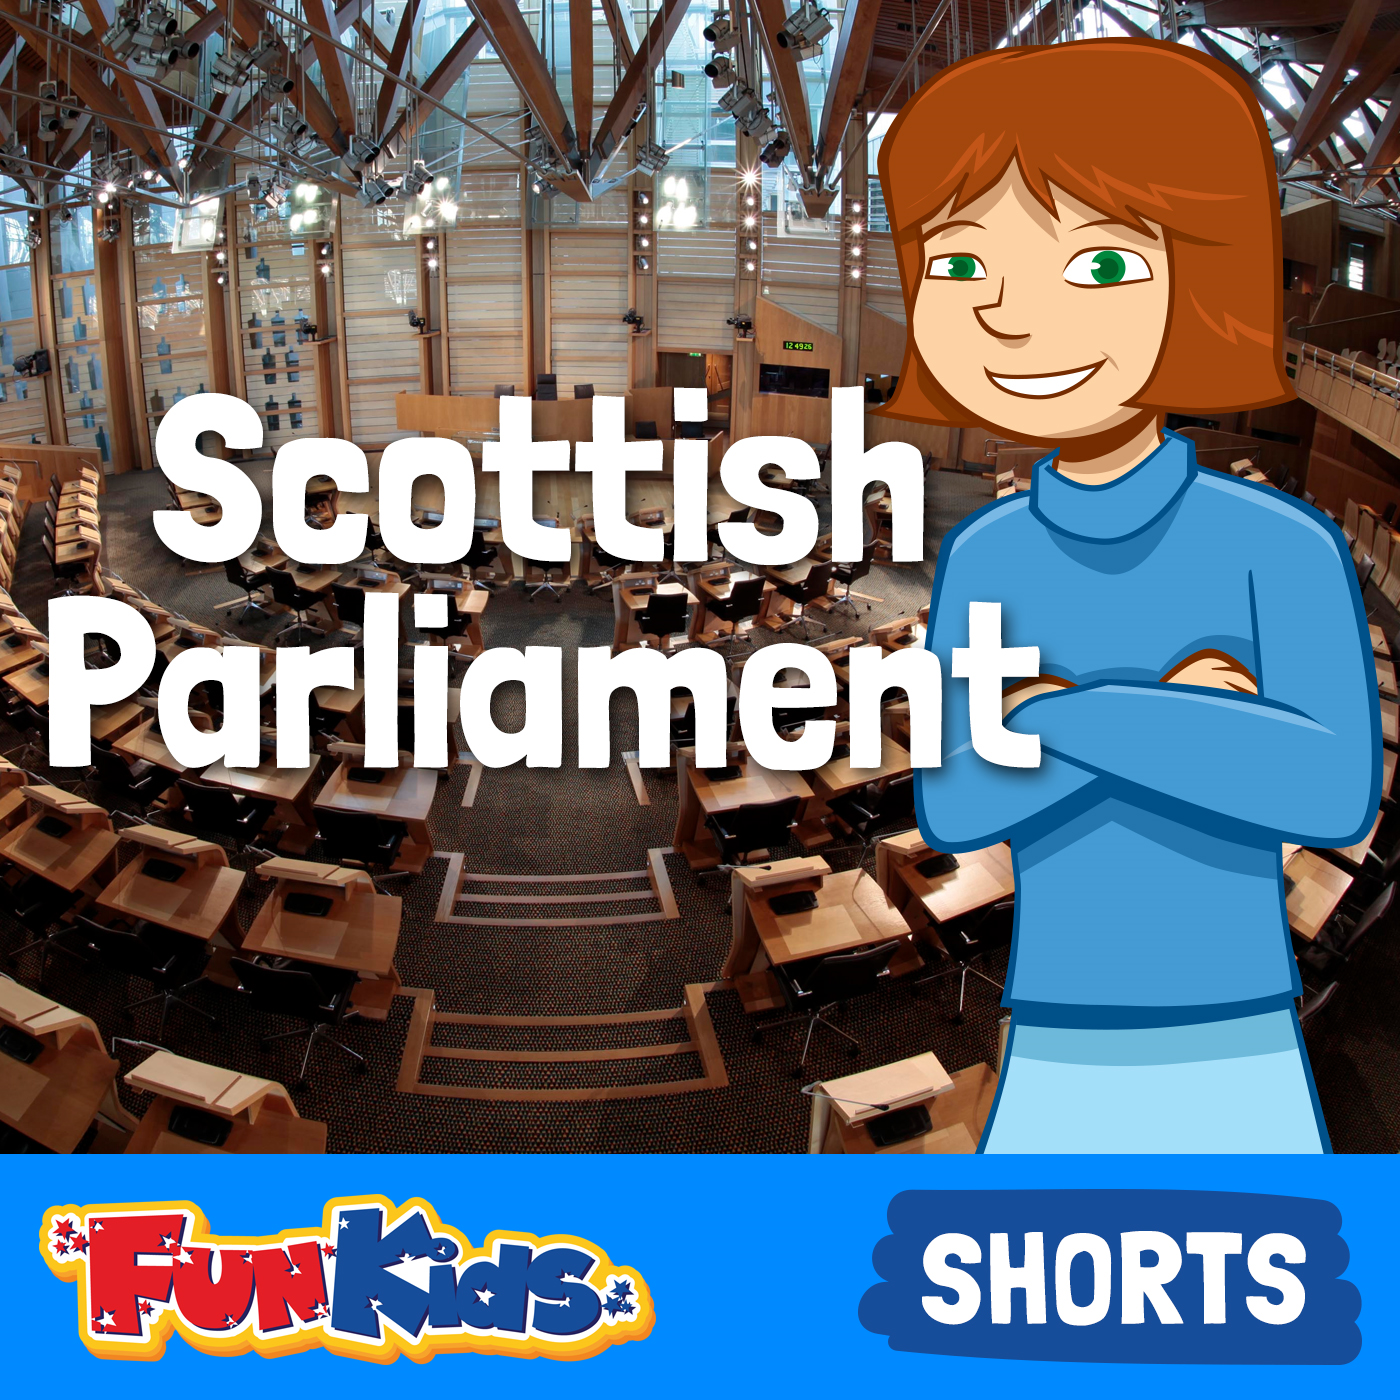 Inside Scottish Parliament: A Day in the Life of an MSP